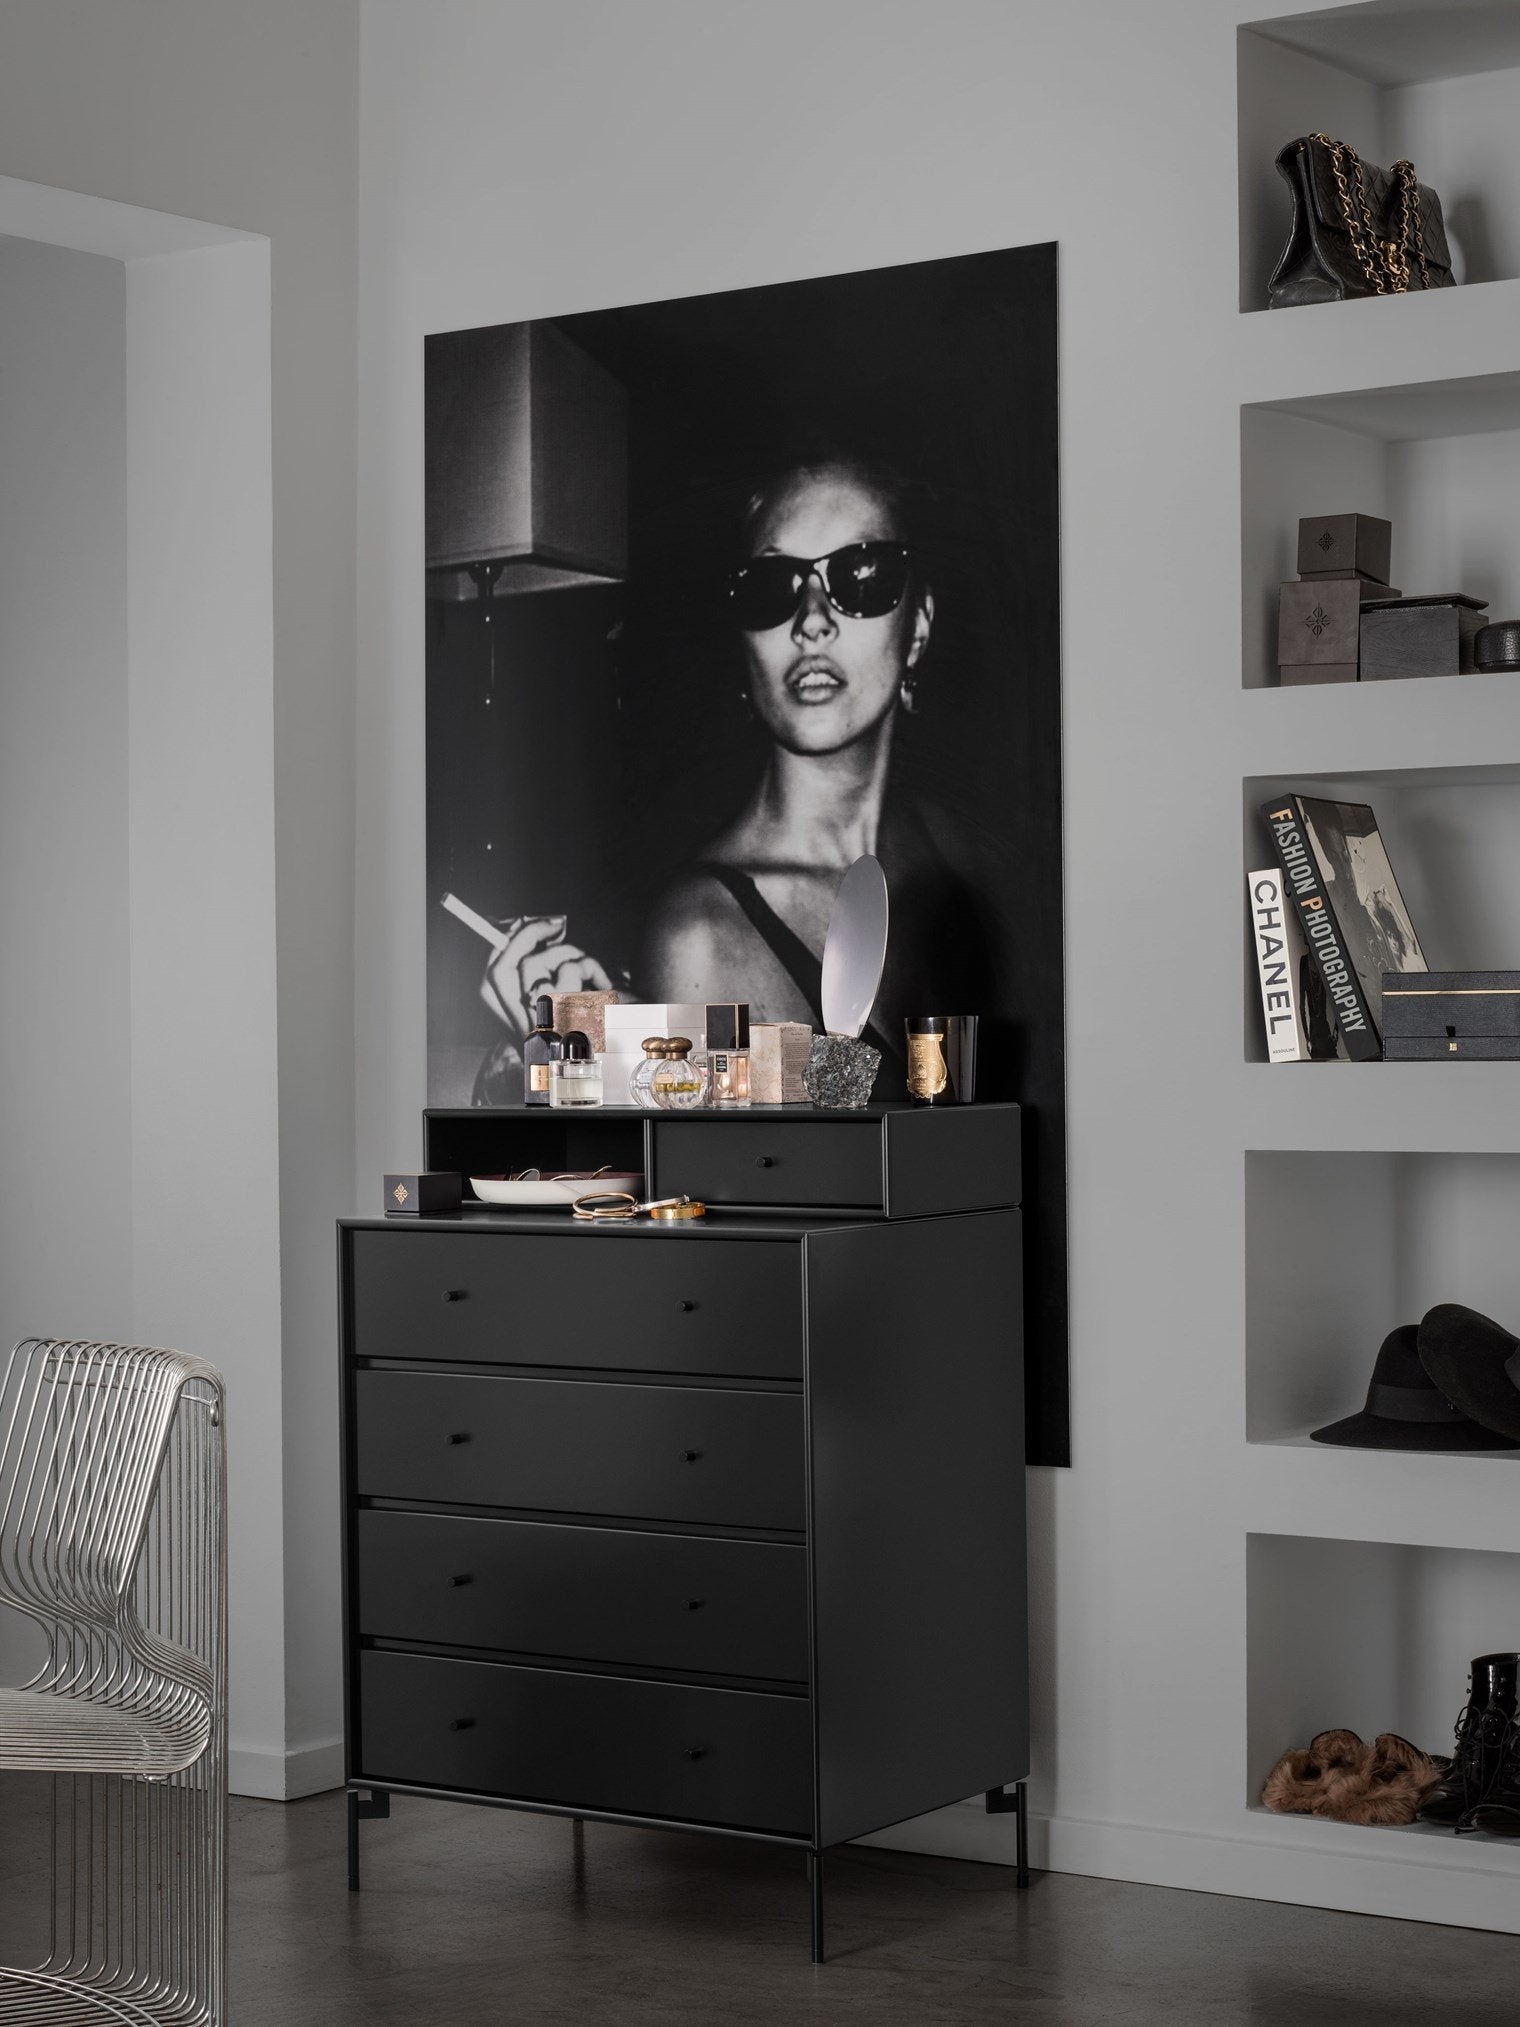 Montana Keep Chest Of Drawers With Legs, Shadow/Black